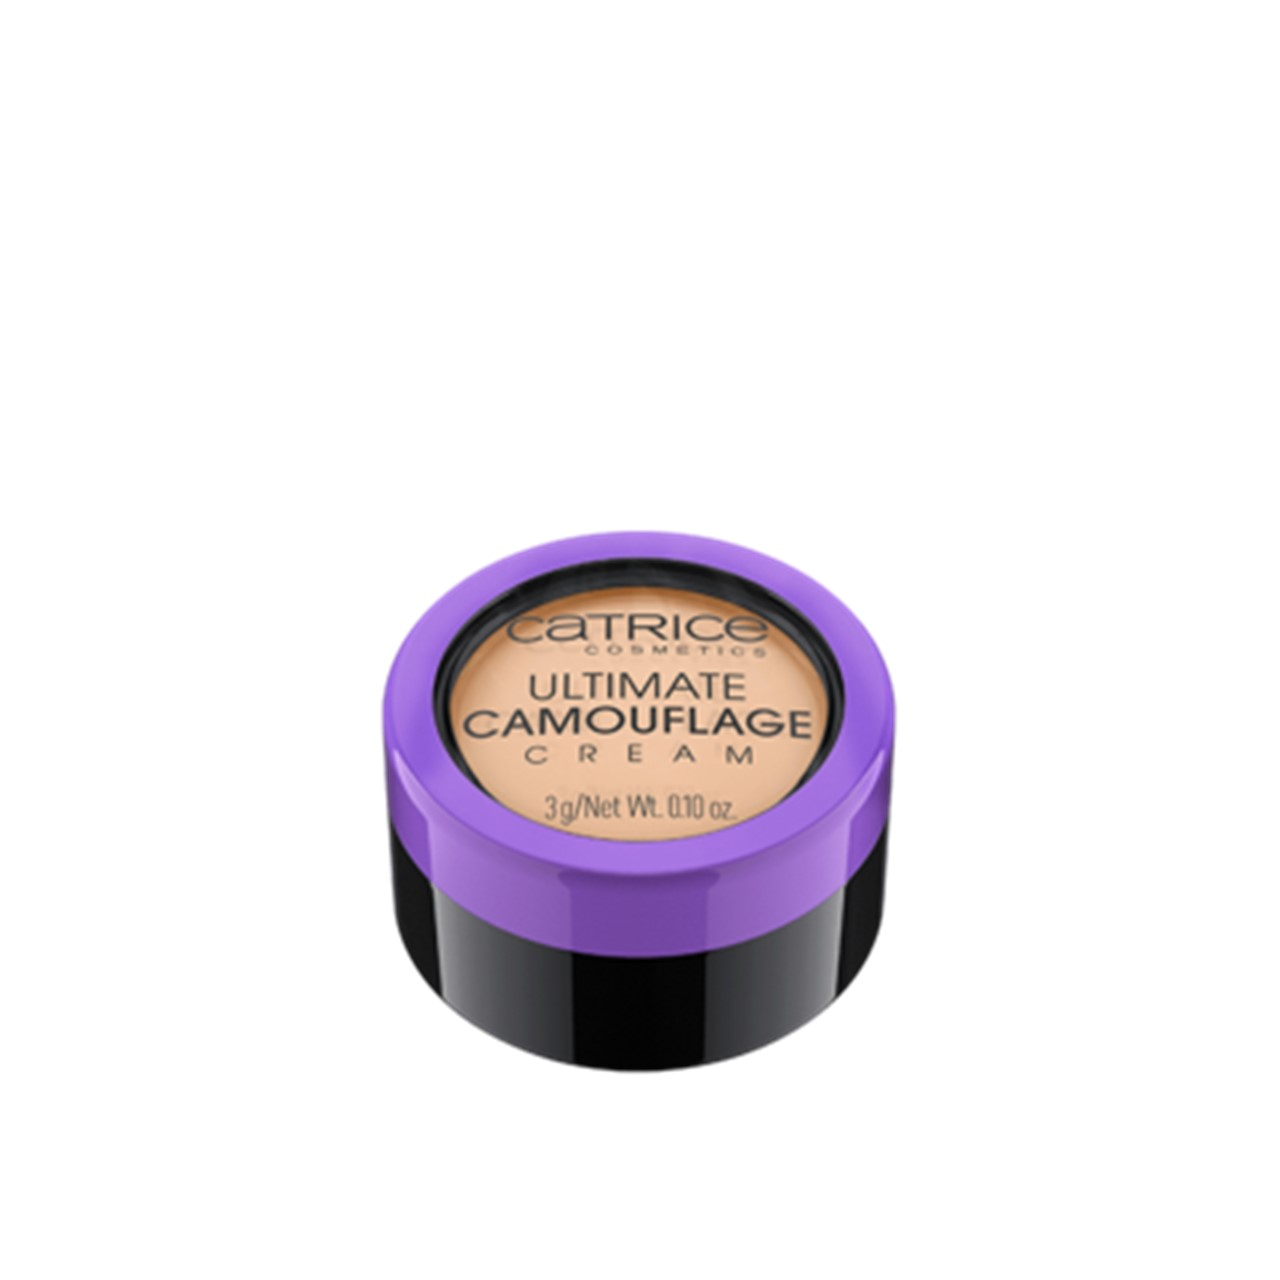 Buy Catrice Ultimate Camouflage Cream Fair W 015 Greenland 3g ·